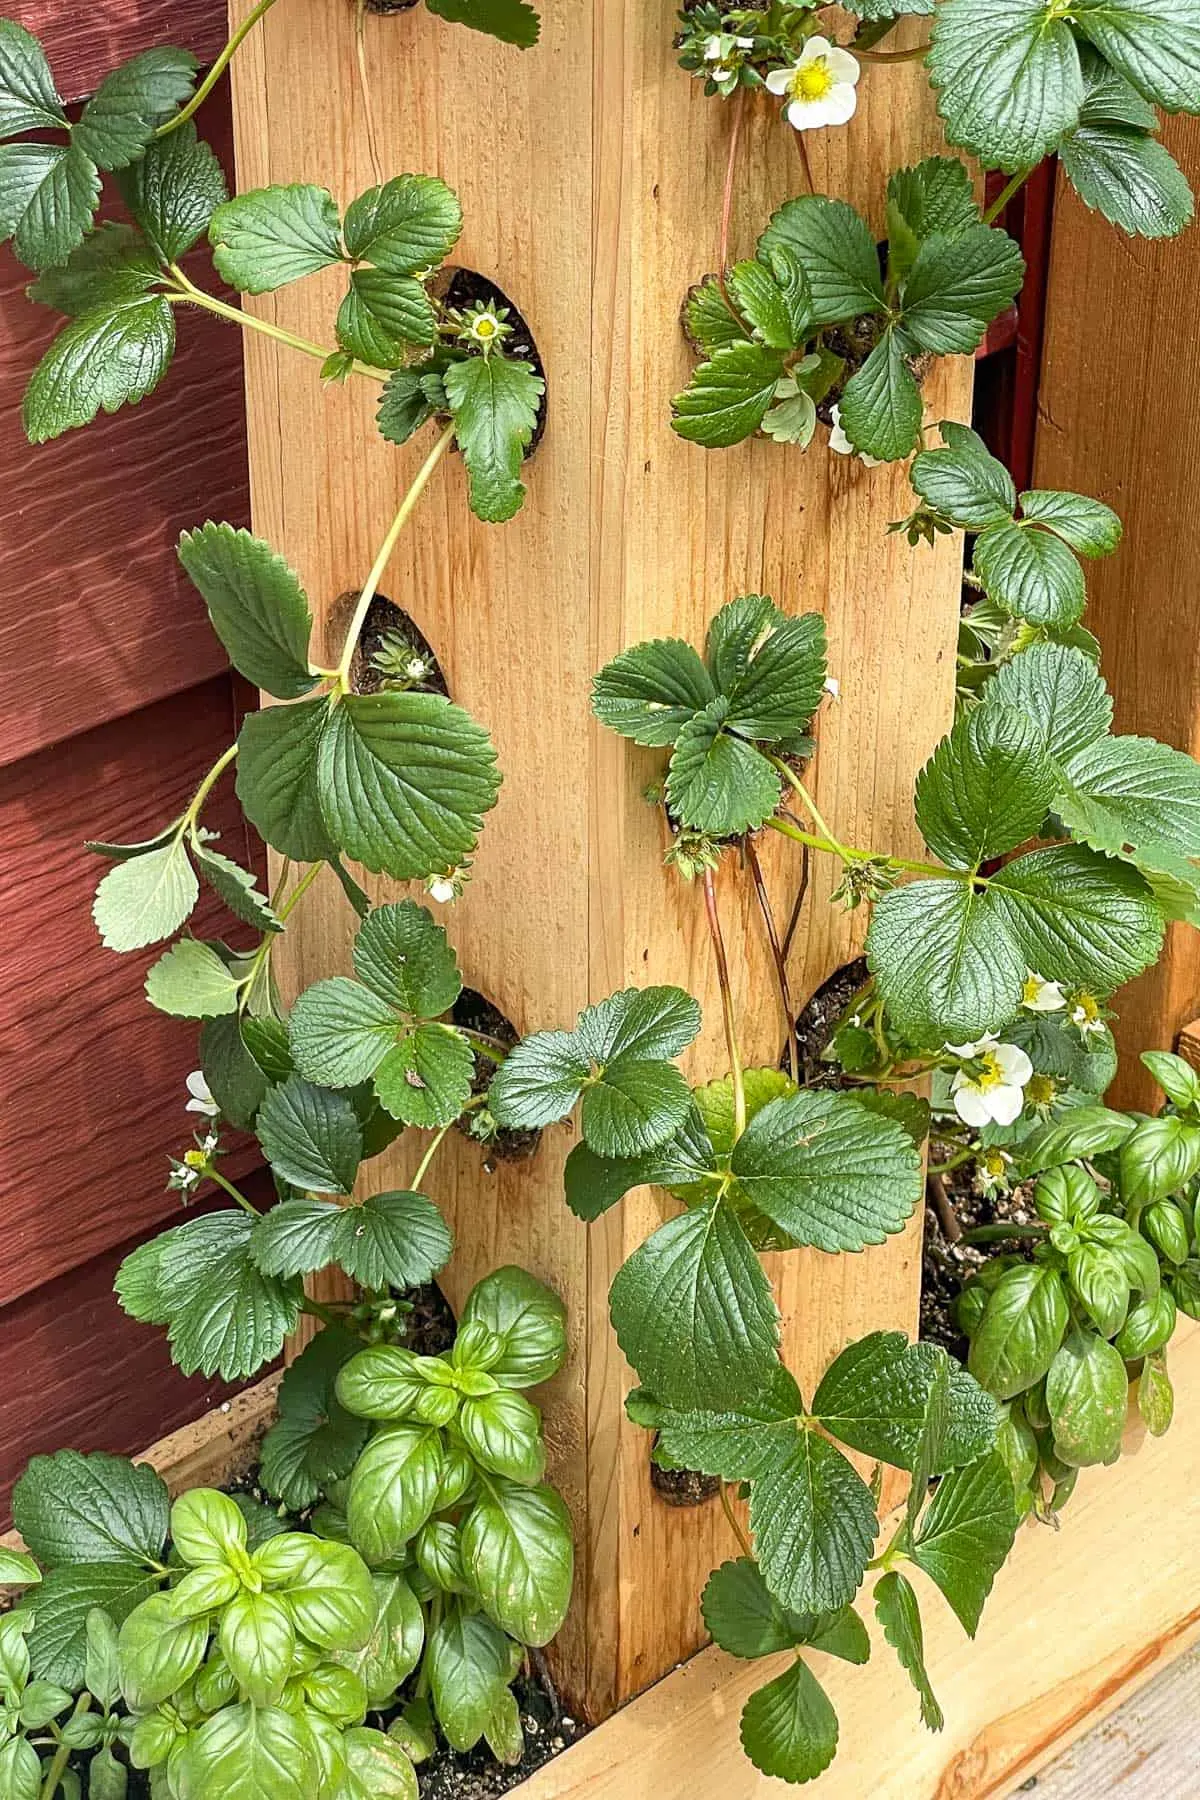 DIY strawberry tower with basil planted in the bottom